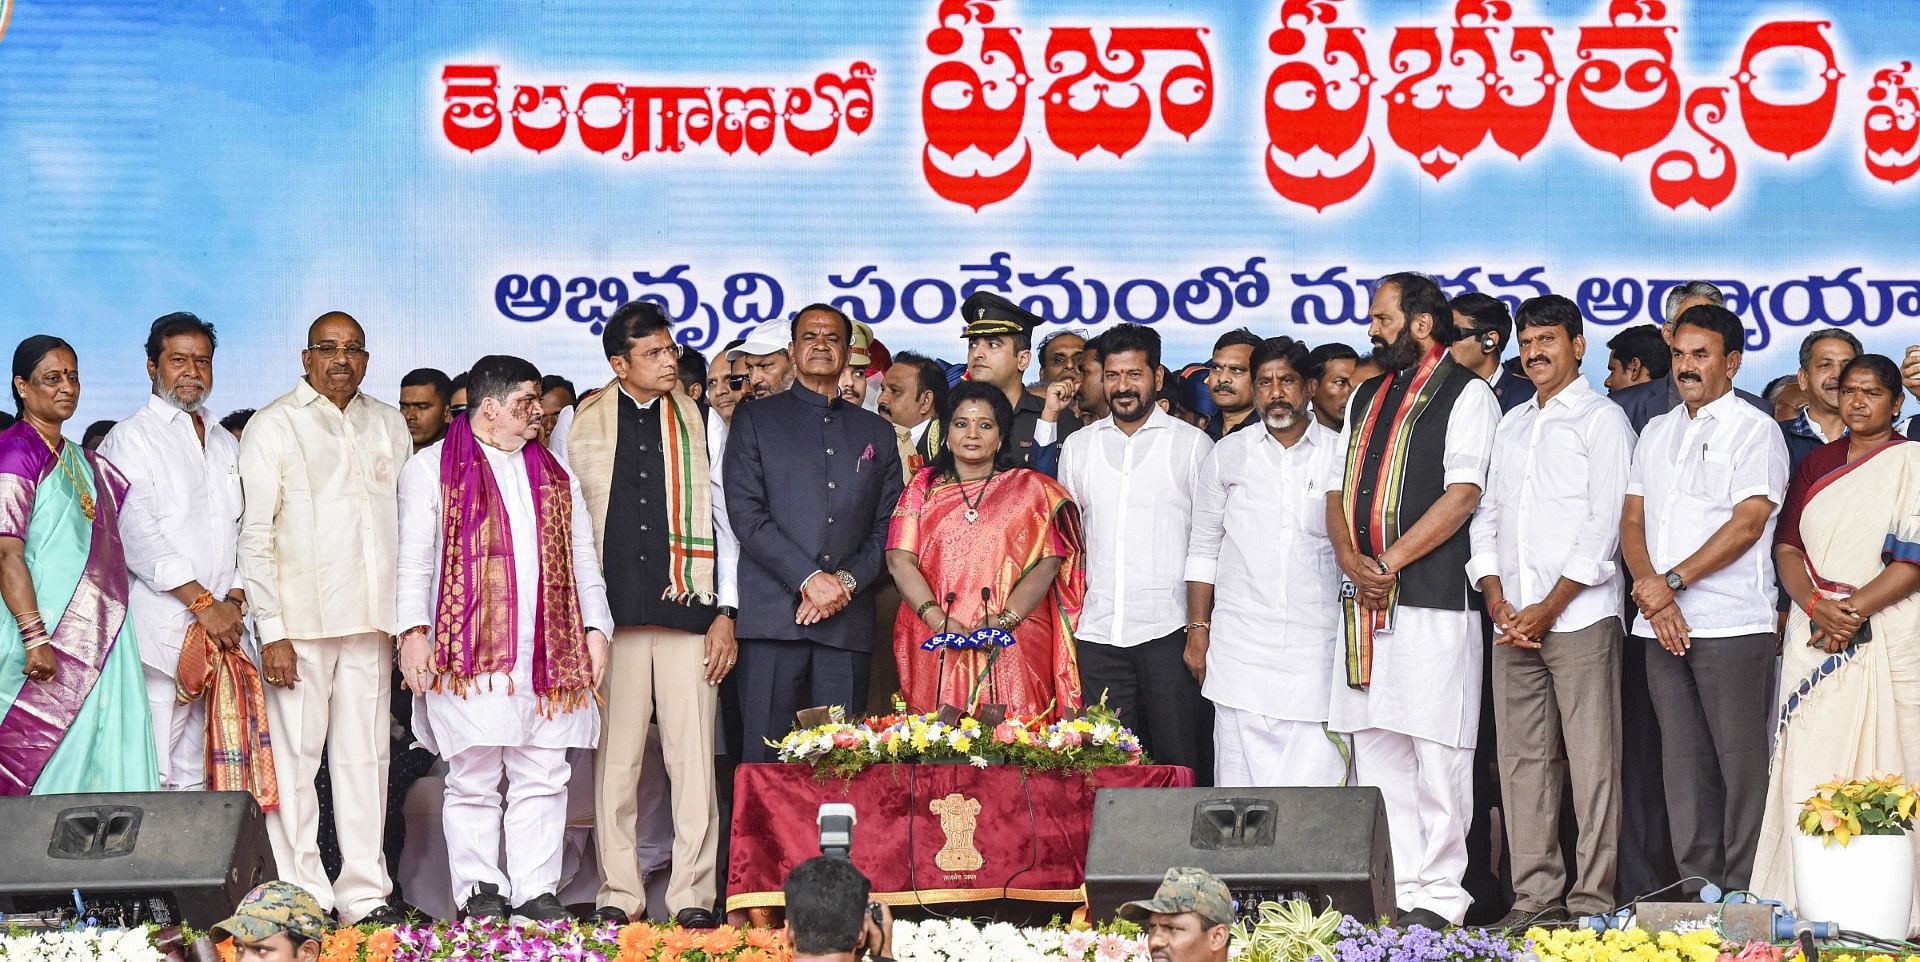 <div class="paragraphs"><p>The Congress Cabinet in Telangana was sworn in on 7 December.</p></div>